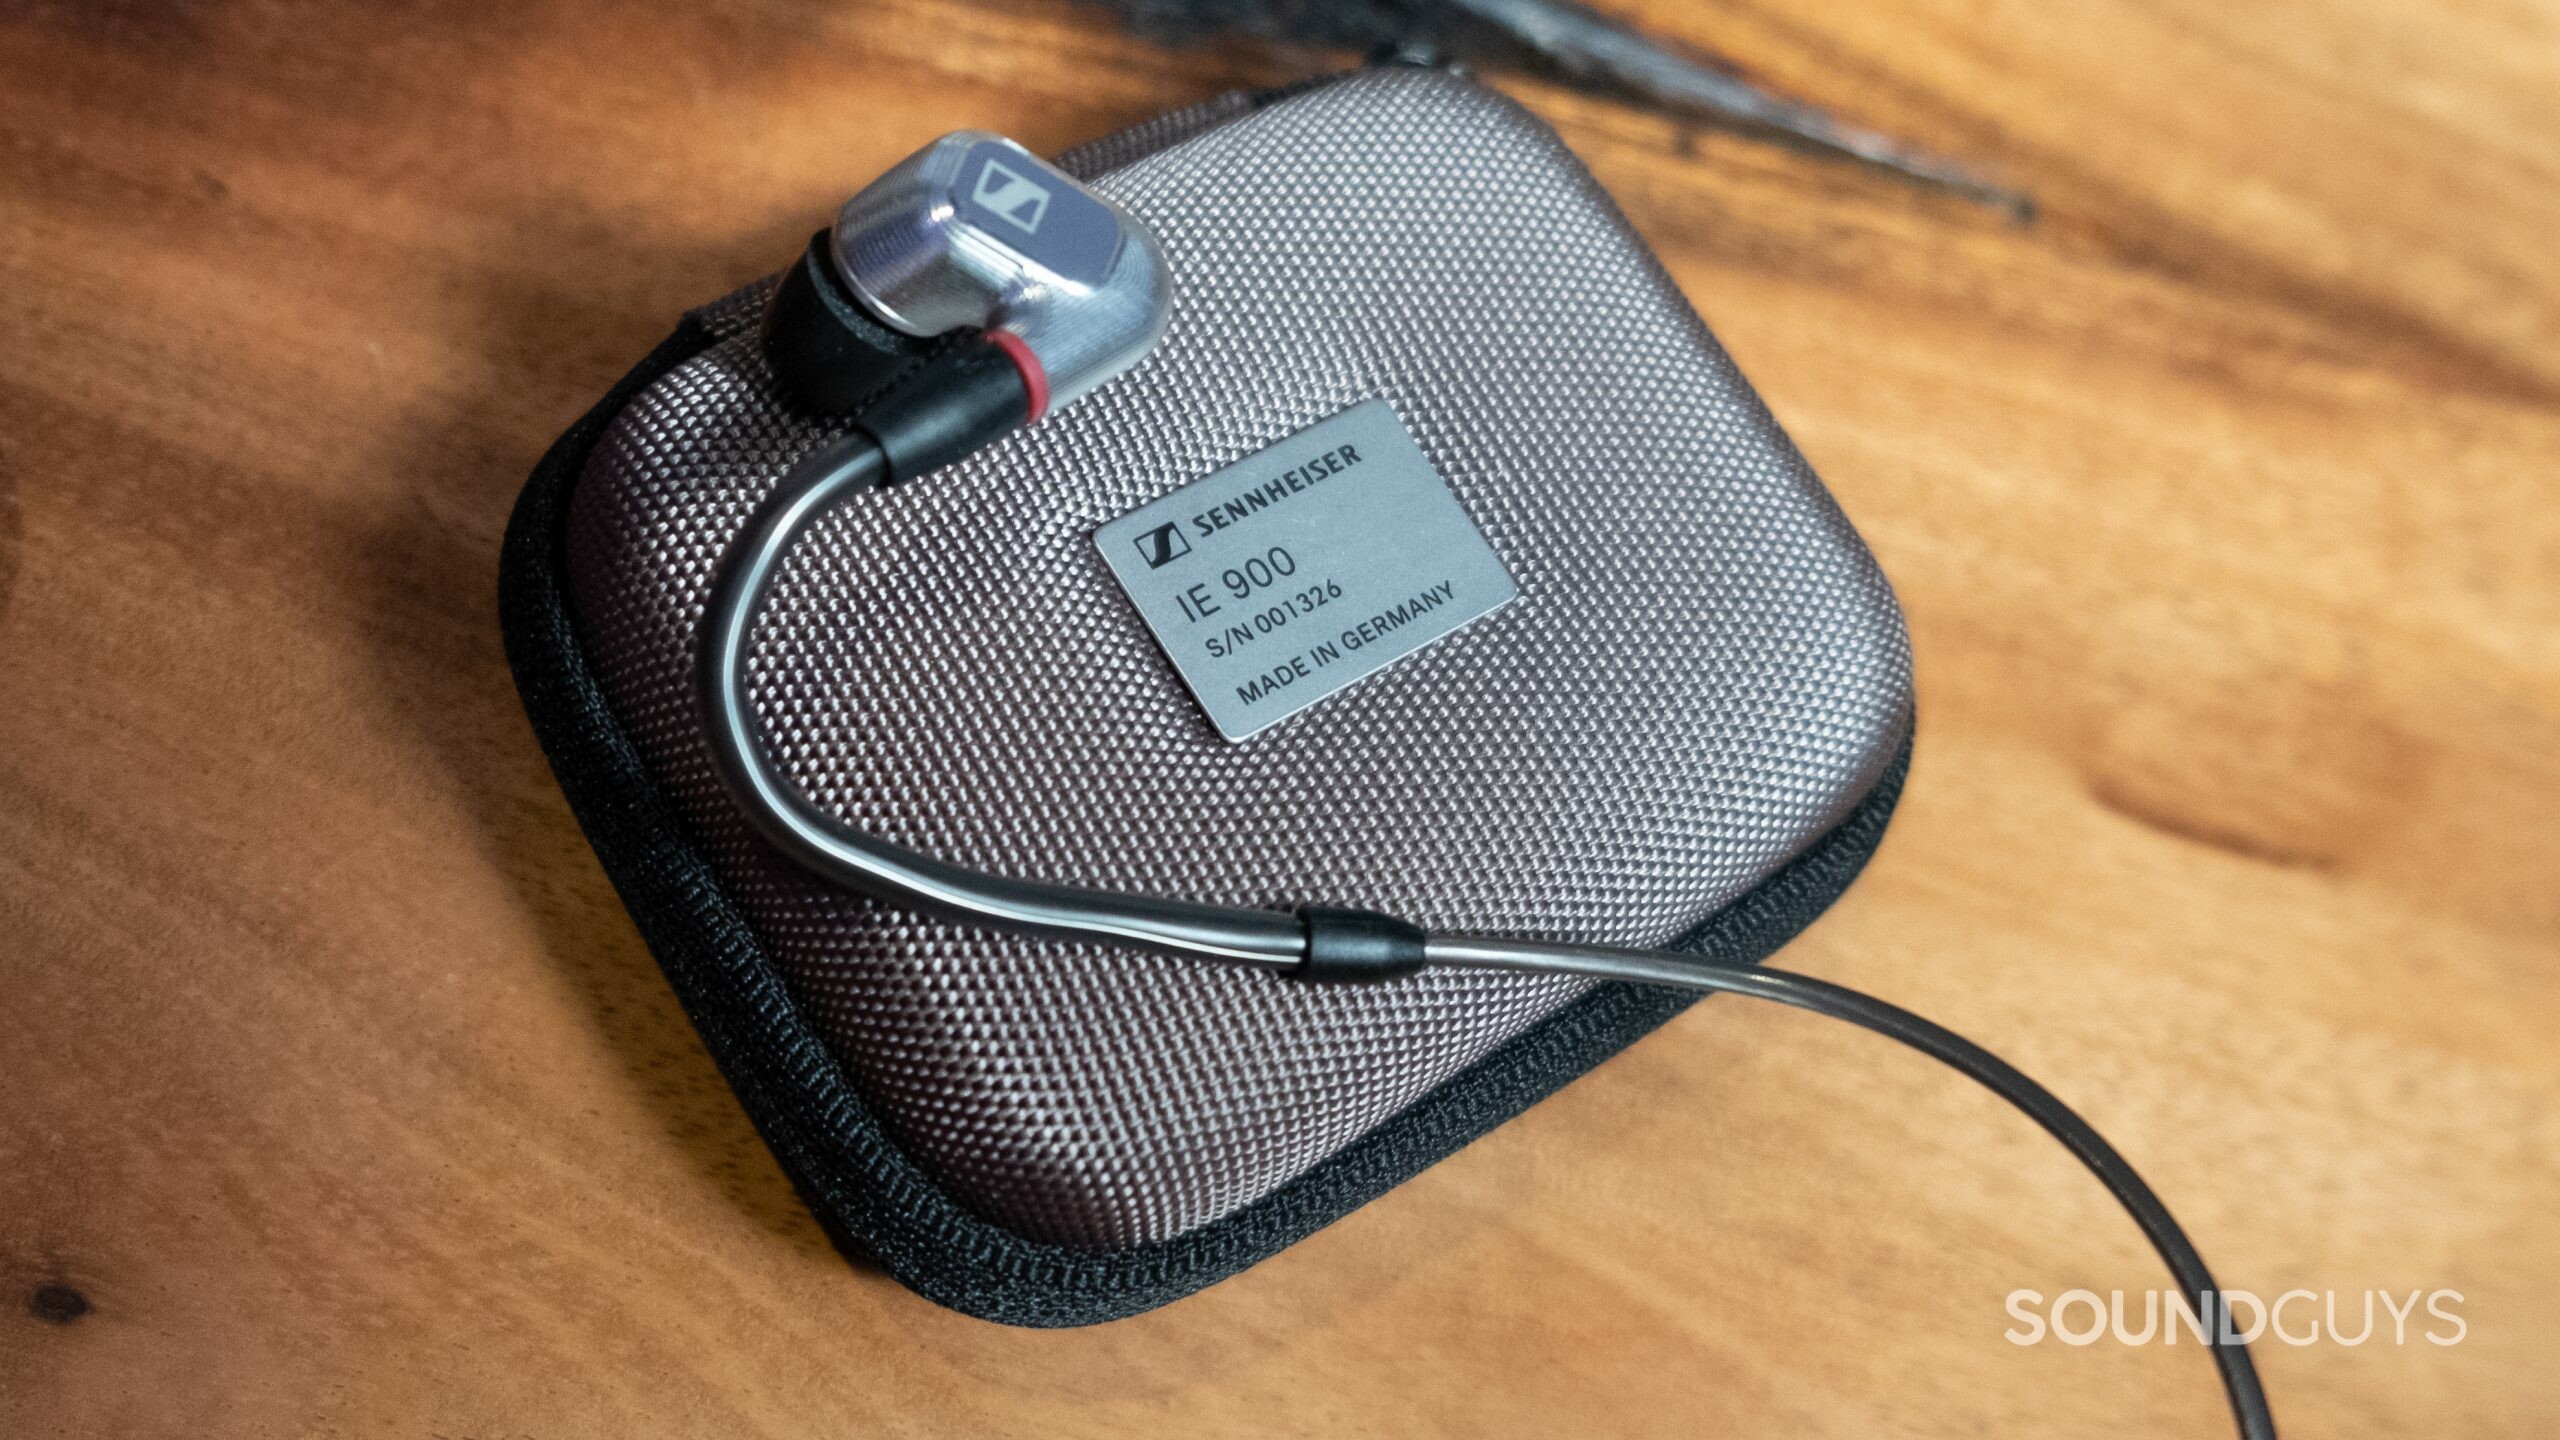 The image shows the right Sennheiser IE 900 earbud resting on top of the greyish case with individual serial number, atop a wood desk.